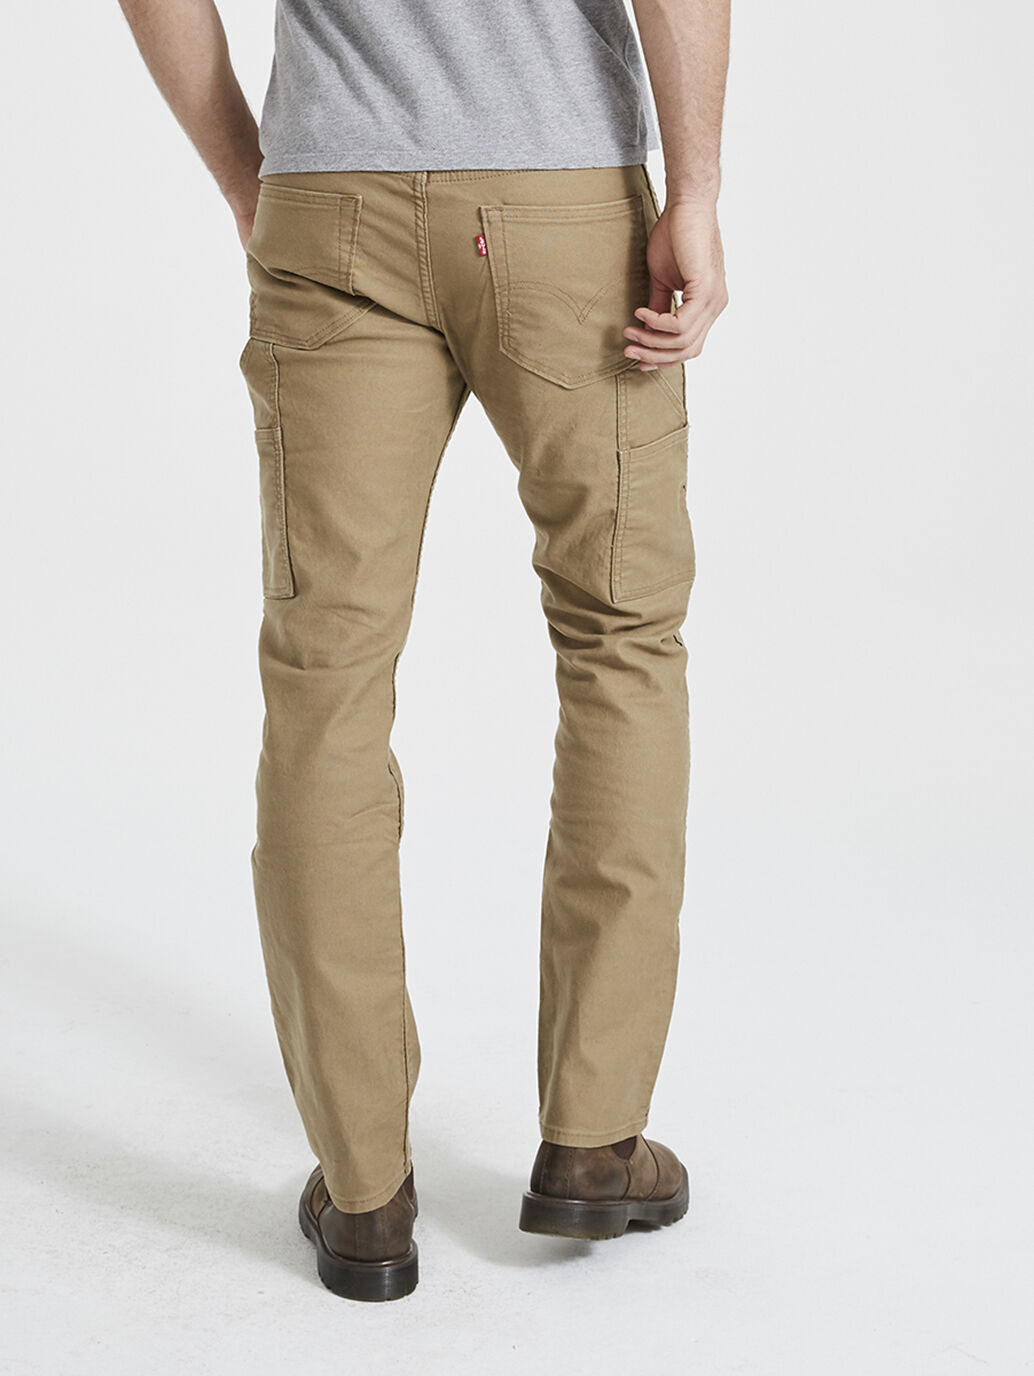 Mens Levis Trousers  Levis Chinos  Next